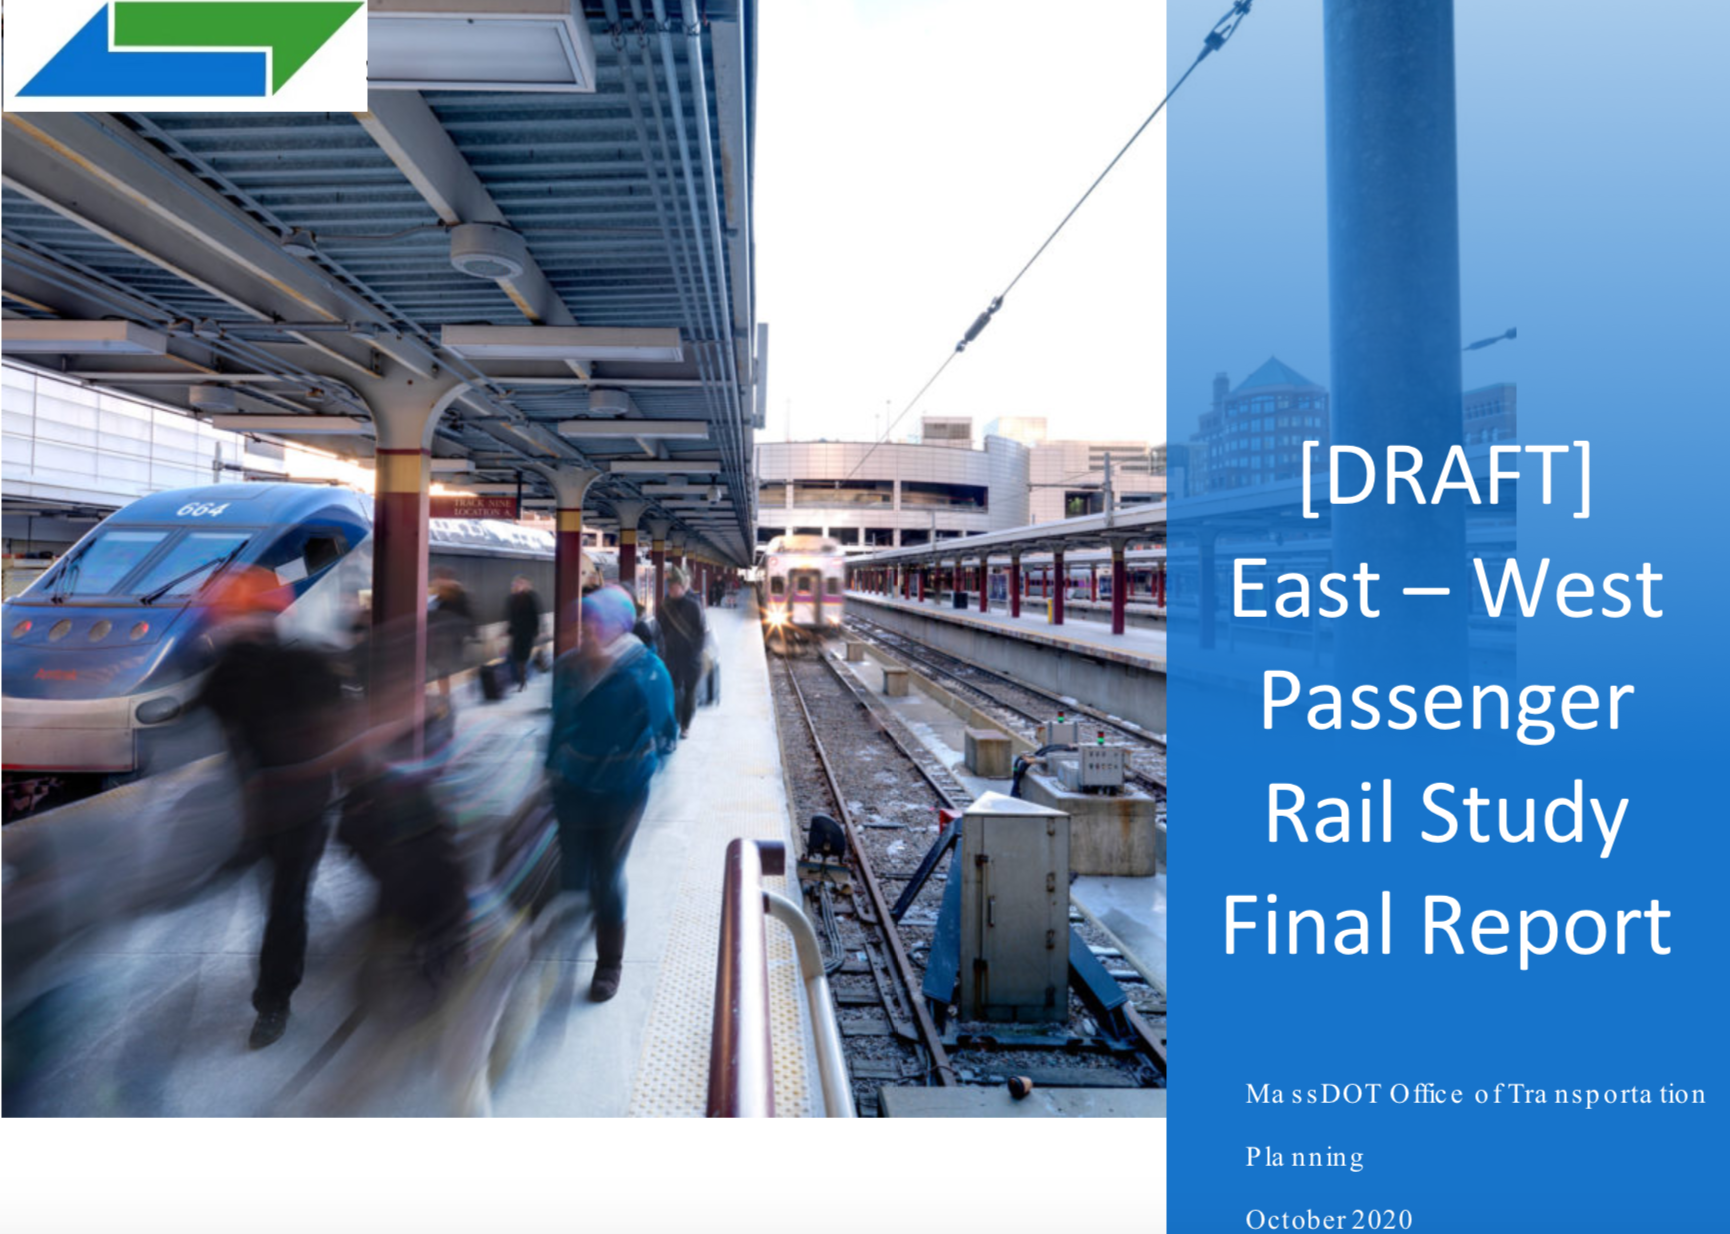 Cover page of [DRAFT] East-West Passenger Rail Study Final Report, MassDOT Office of Transportation Planning, October 2020.